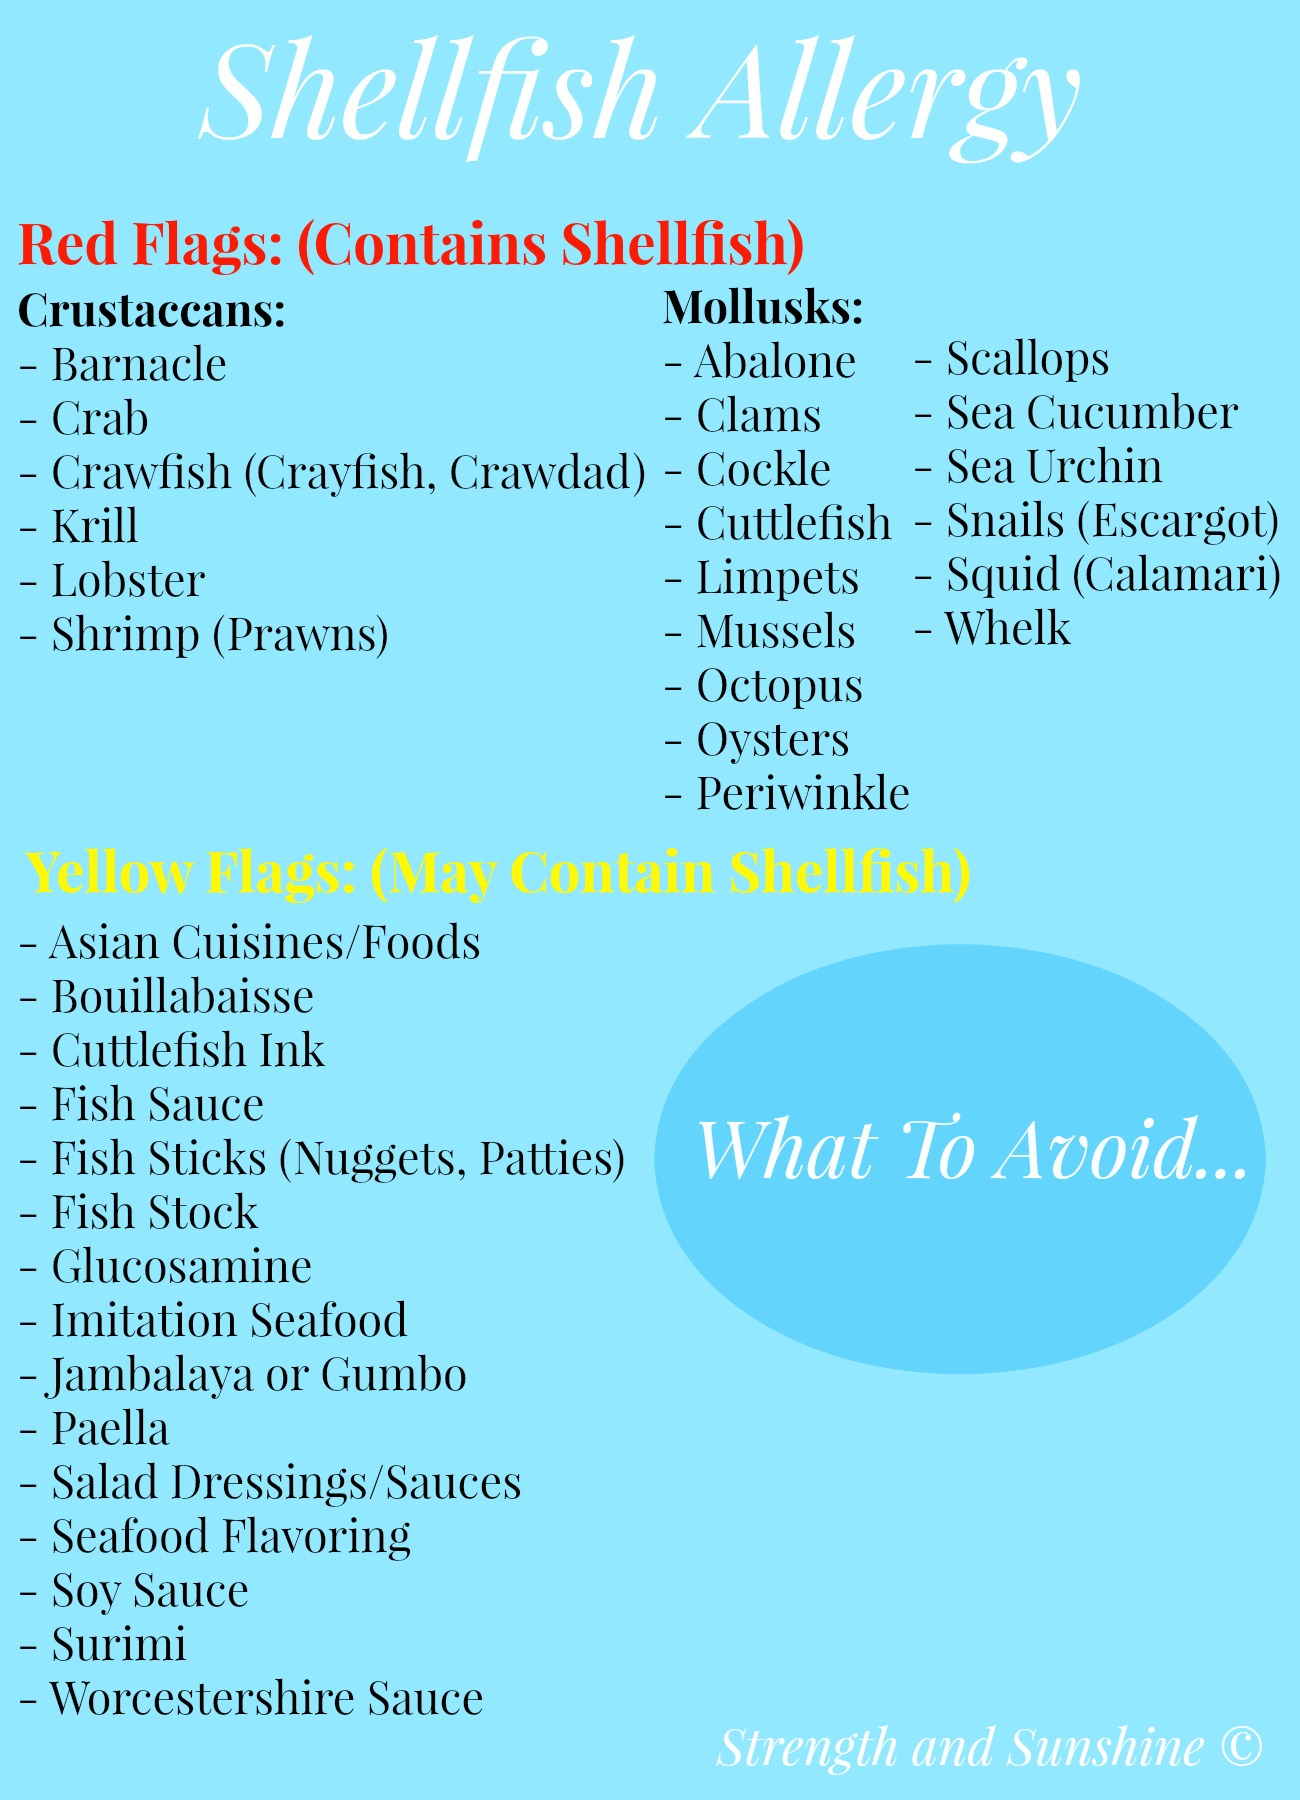 What To Avoid With A Shellfish Allergy | Strength and Sunshine @RebeccaGF666 The most common Top 8 food allergy in adults and can cause severe anaphylaxis and life threatening reactions. Here is a list of what food and ingredients to look for and avoid with a shellfish allergy.